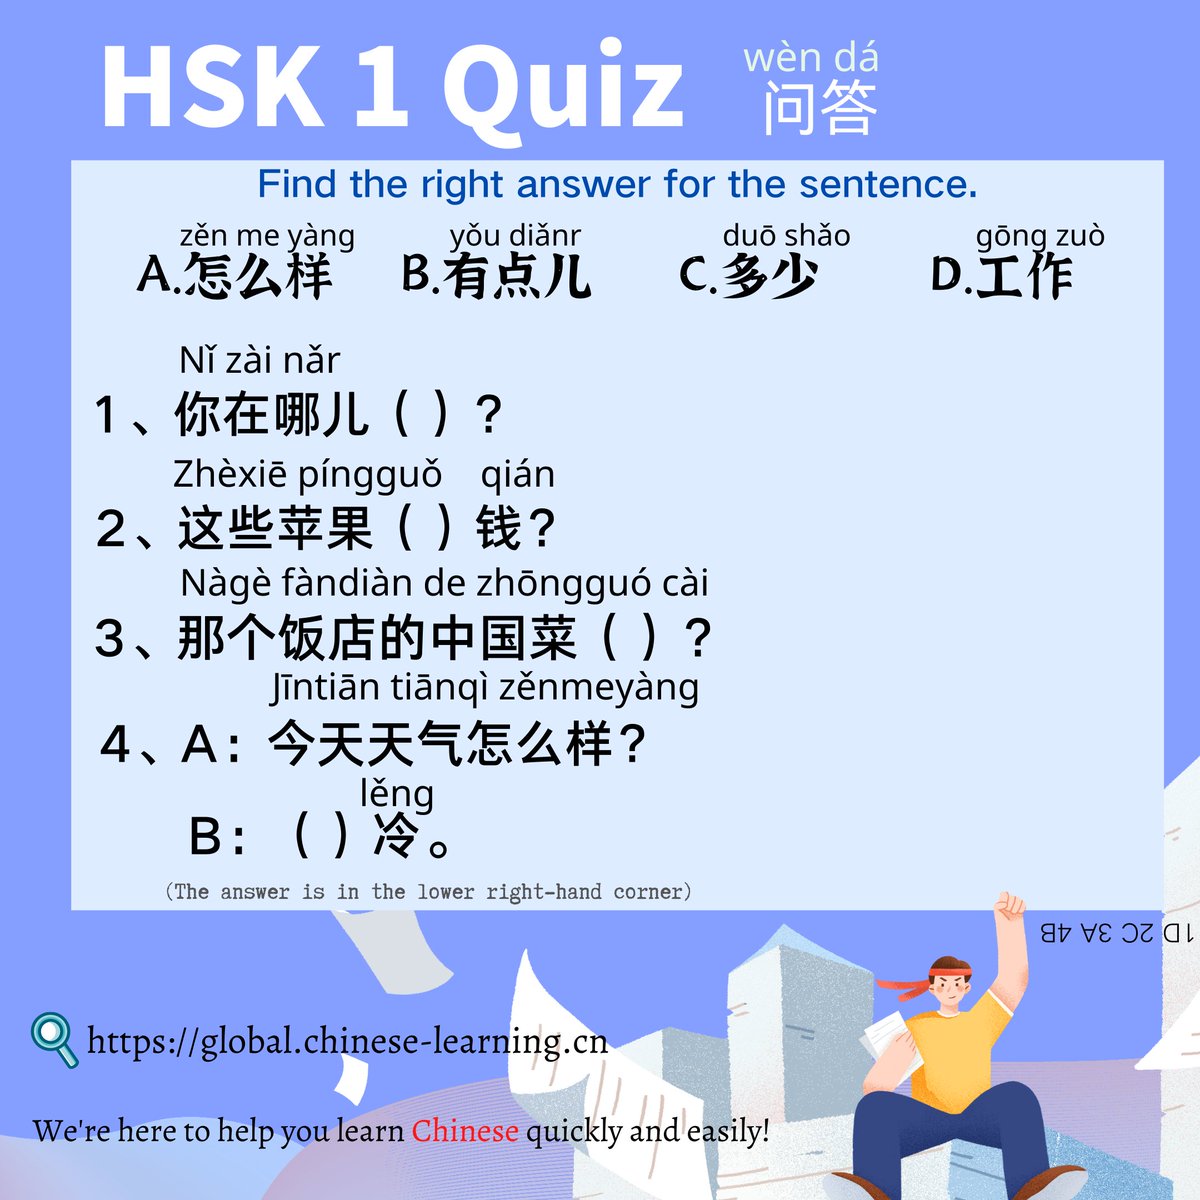 HSK1 Quiz Find the right answer for the sentence. #HSK #汉语 #学汉语 #Chineselearning #studytwt #HSK #学中文 #studytwt #mandarin